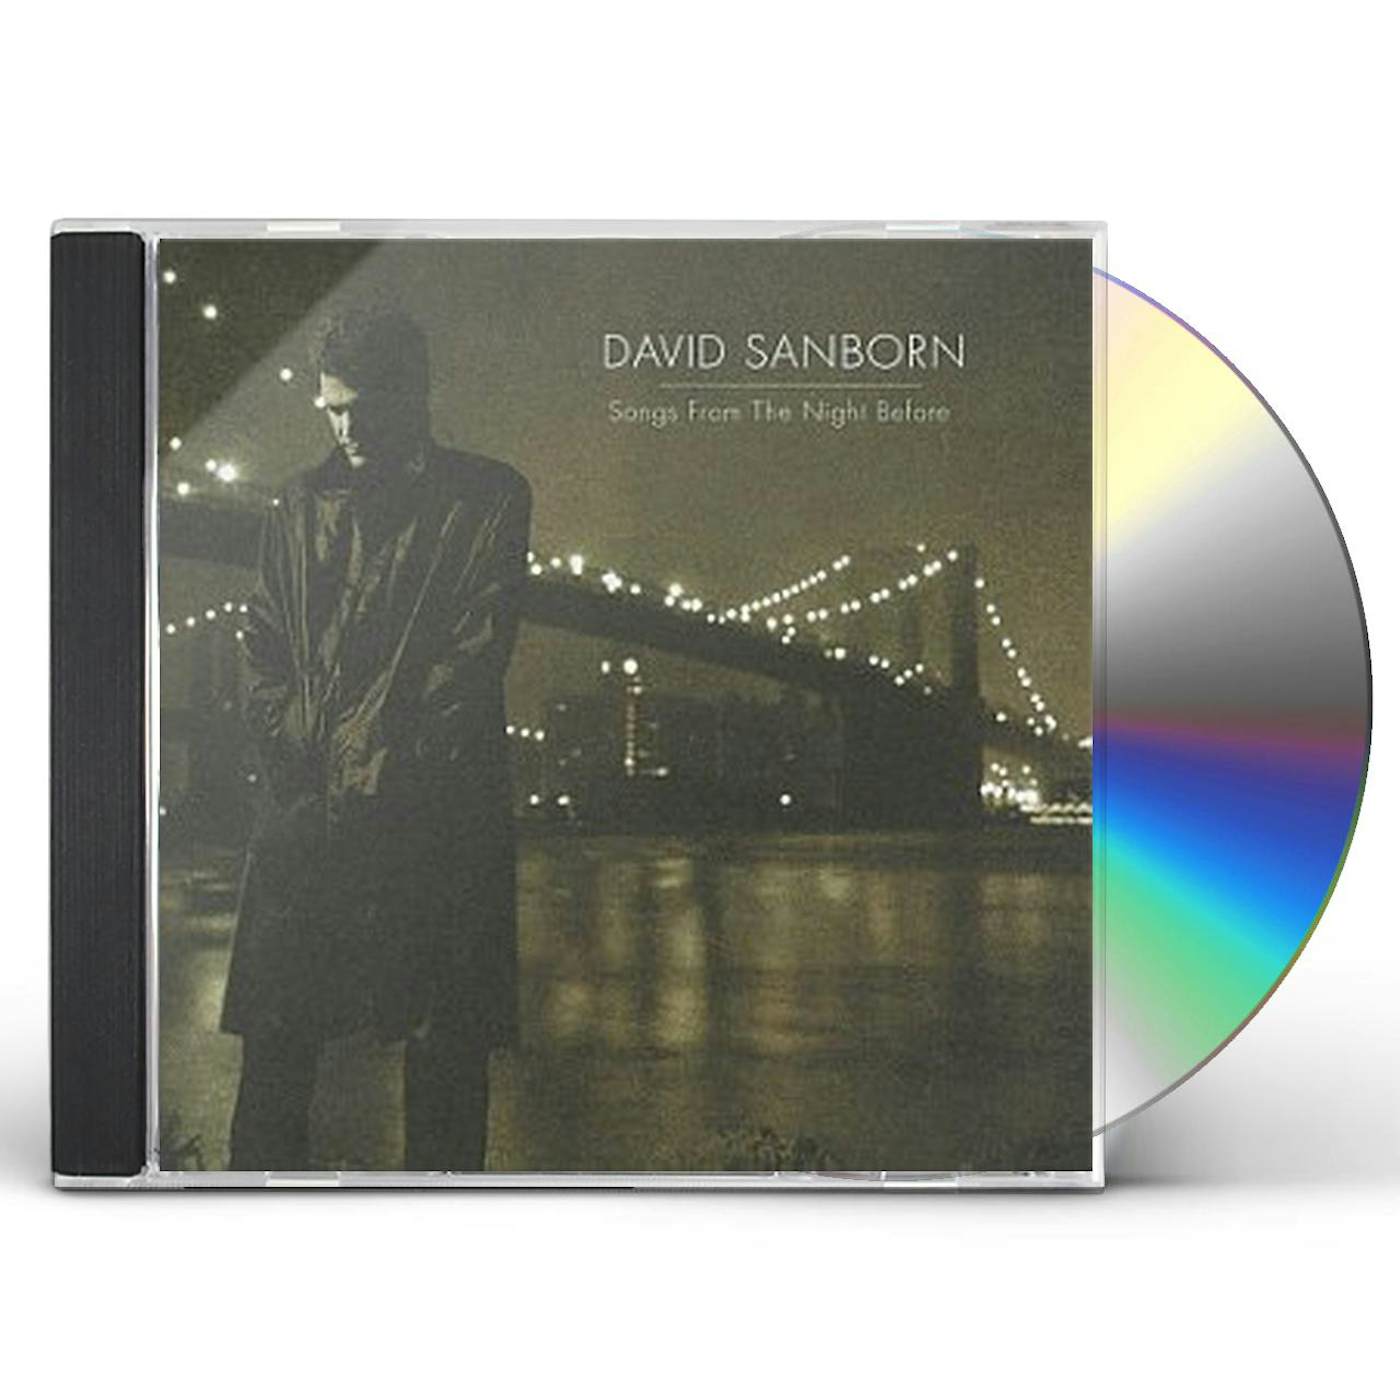 David Sanborn SONGS FROM THE NIGHT BEFORE CD